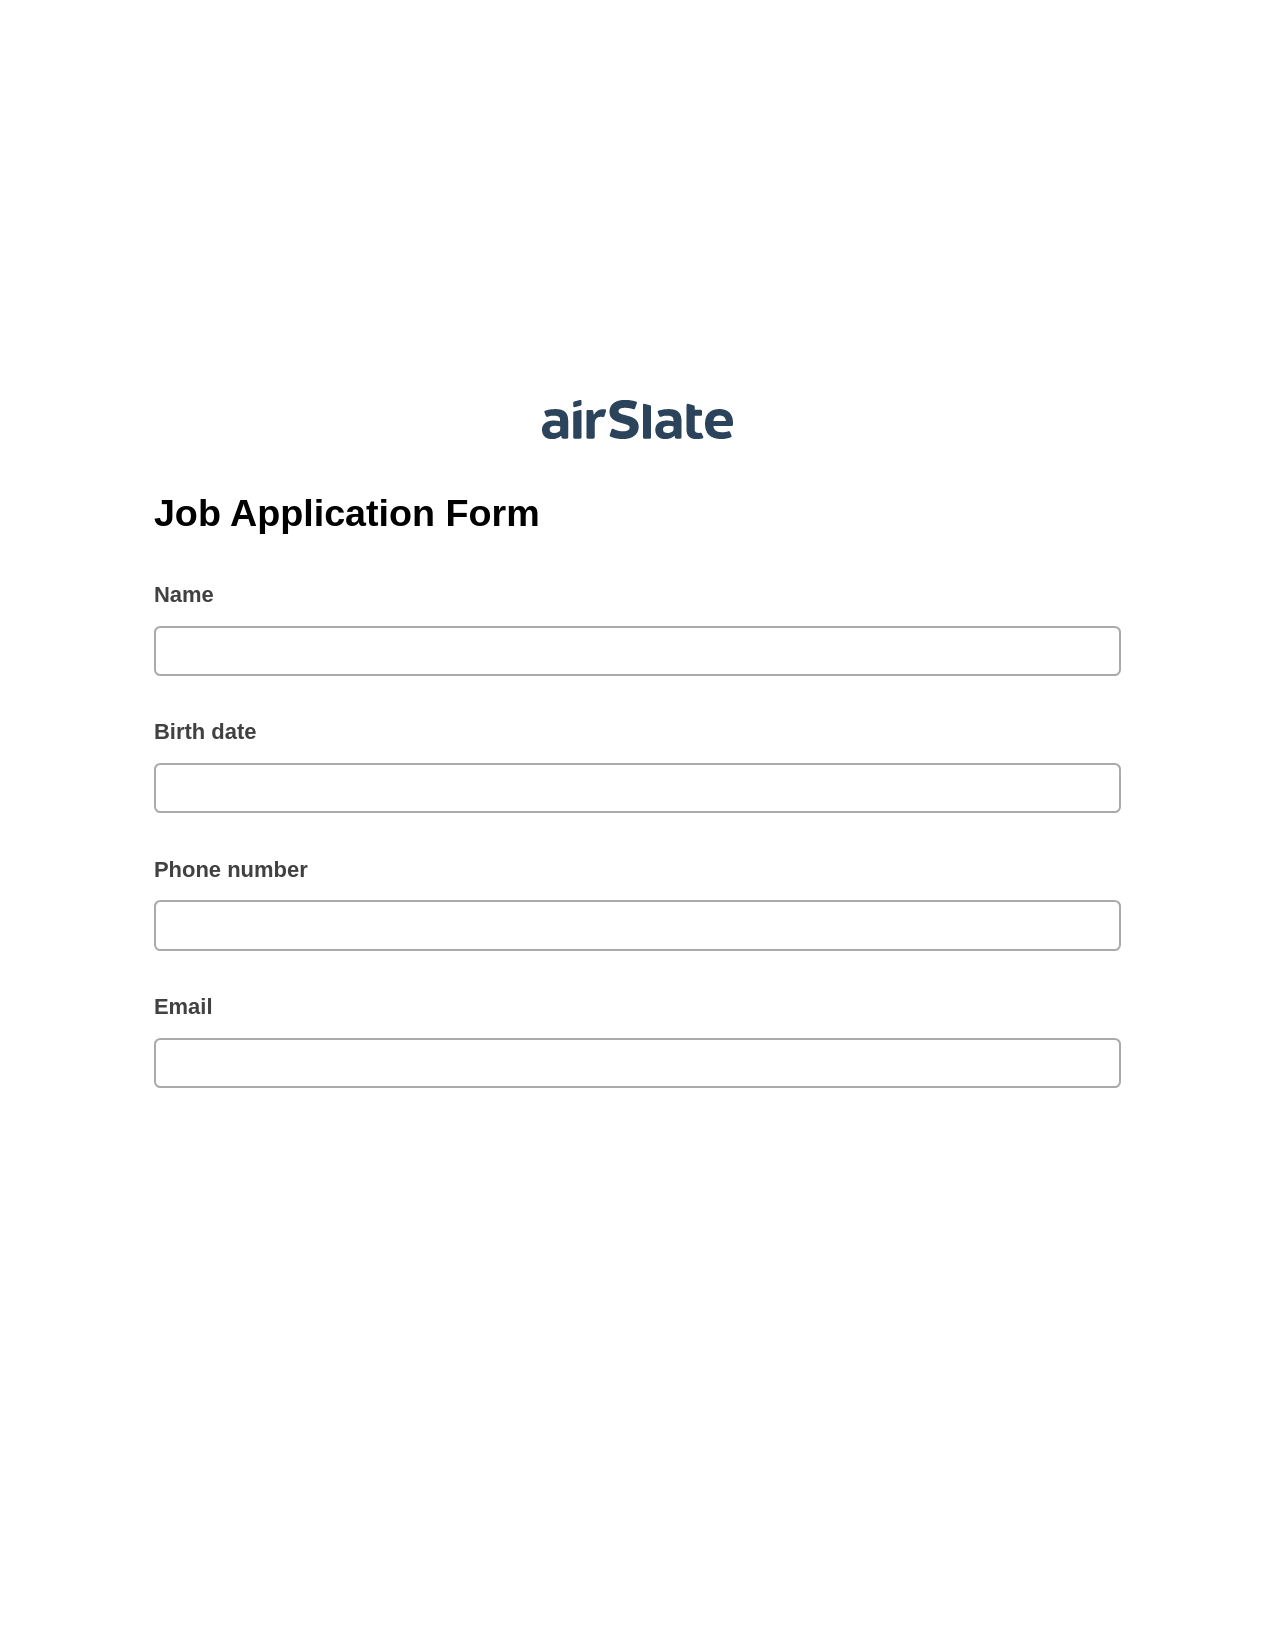 Job Application Form Pre-fill from CSV File Bot, Pre-fill with Custom Data Bot, Post-finish Document Bot